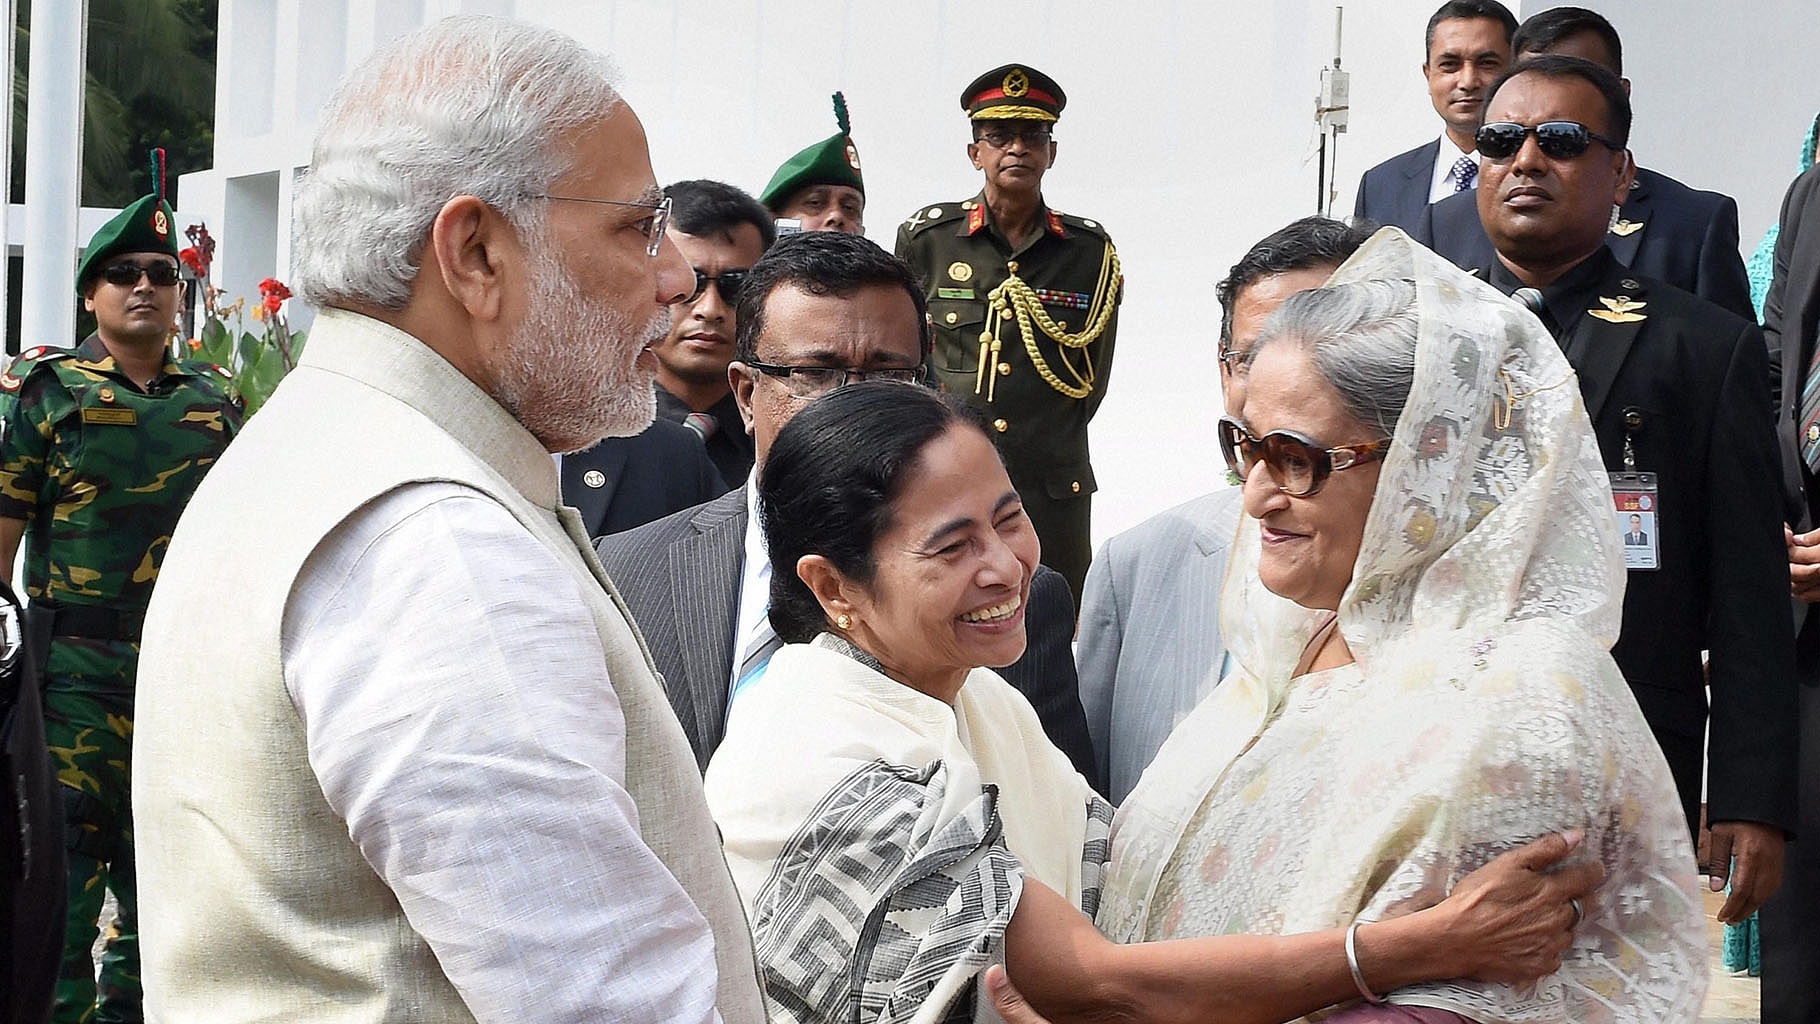 In this file photo, Prime Minister Narendra Modi looks on as
Bangladesh Prime Minister Sheikh Hasina and West Bengal Chief Minister Mamata
Banerjee hug each other at the flag off ceremony of bus services between
Bangladesh and India. (Photo: PTI) &nbsp; &nbsp; &nbsp;